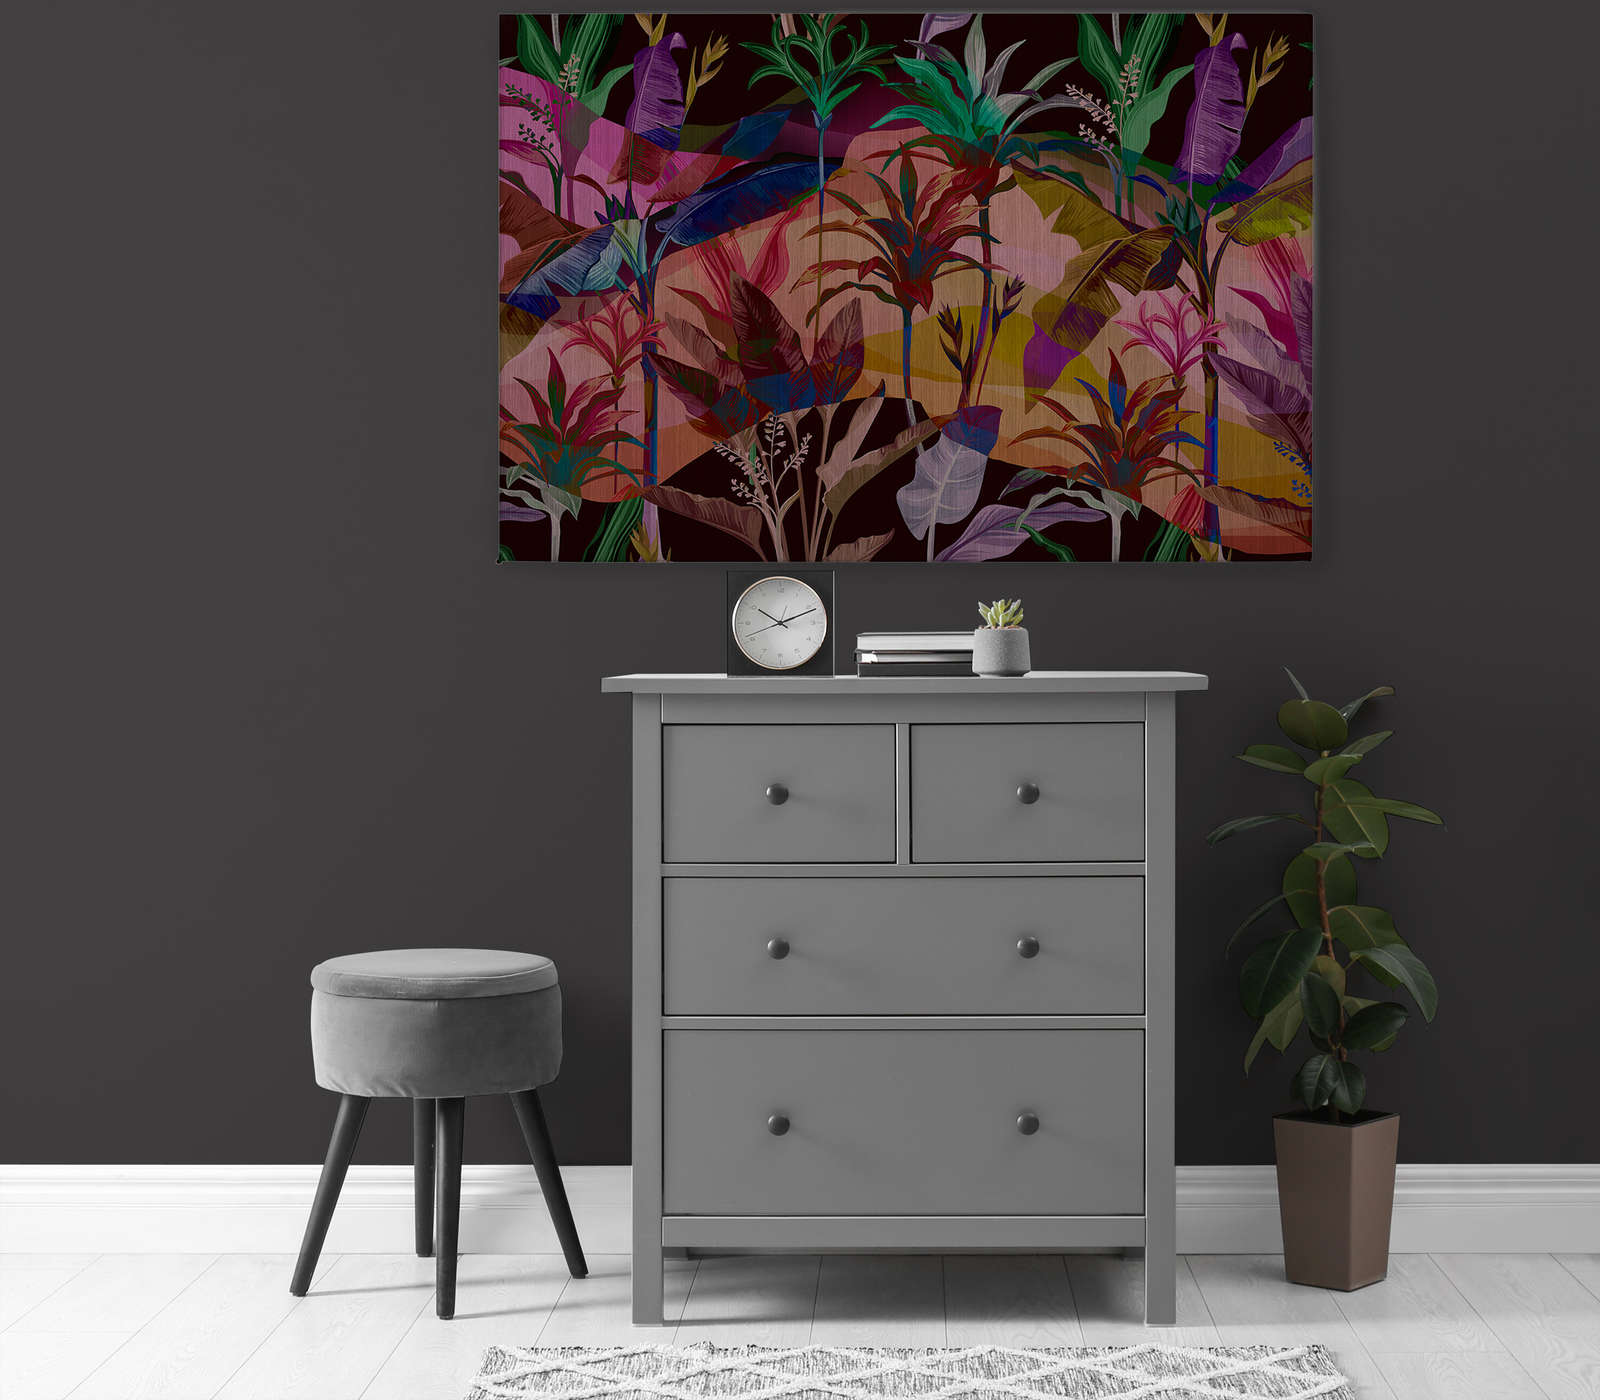             Palmyra 1 - Jungle Canvas Painting Colourful & Abstract Leaves - 1.20 m x 0.80 m
        